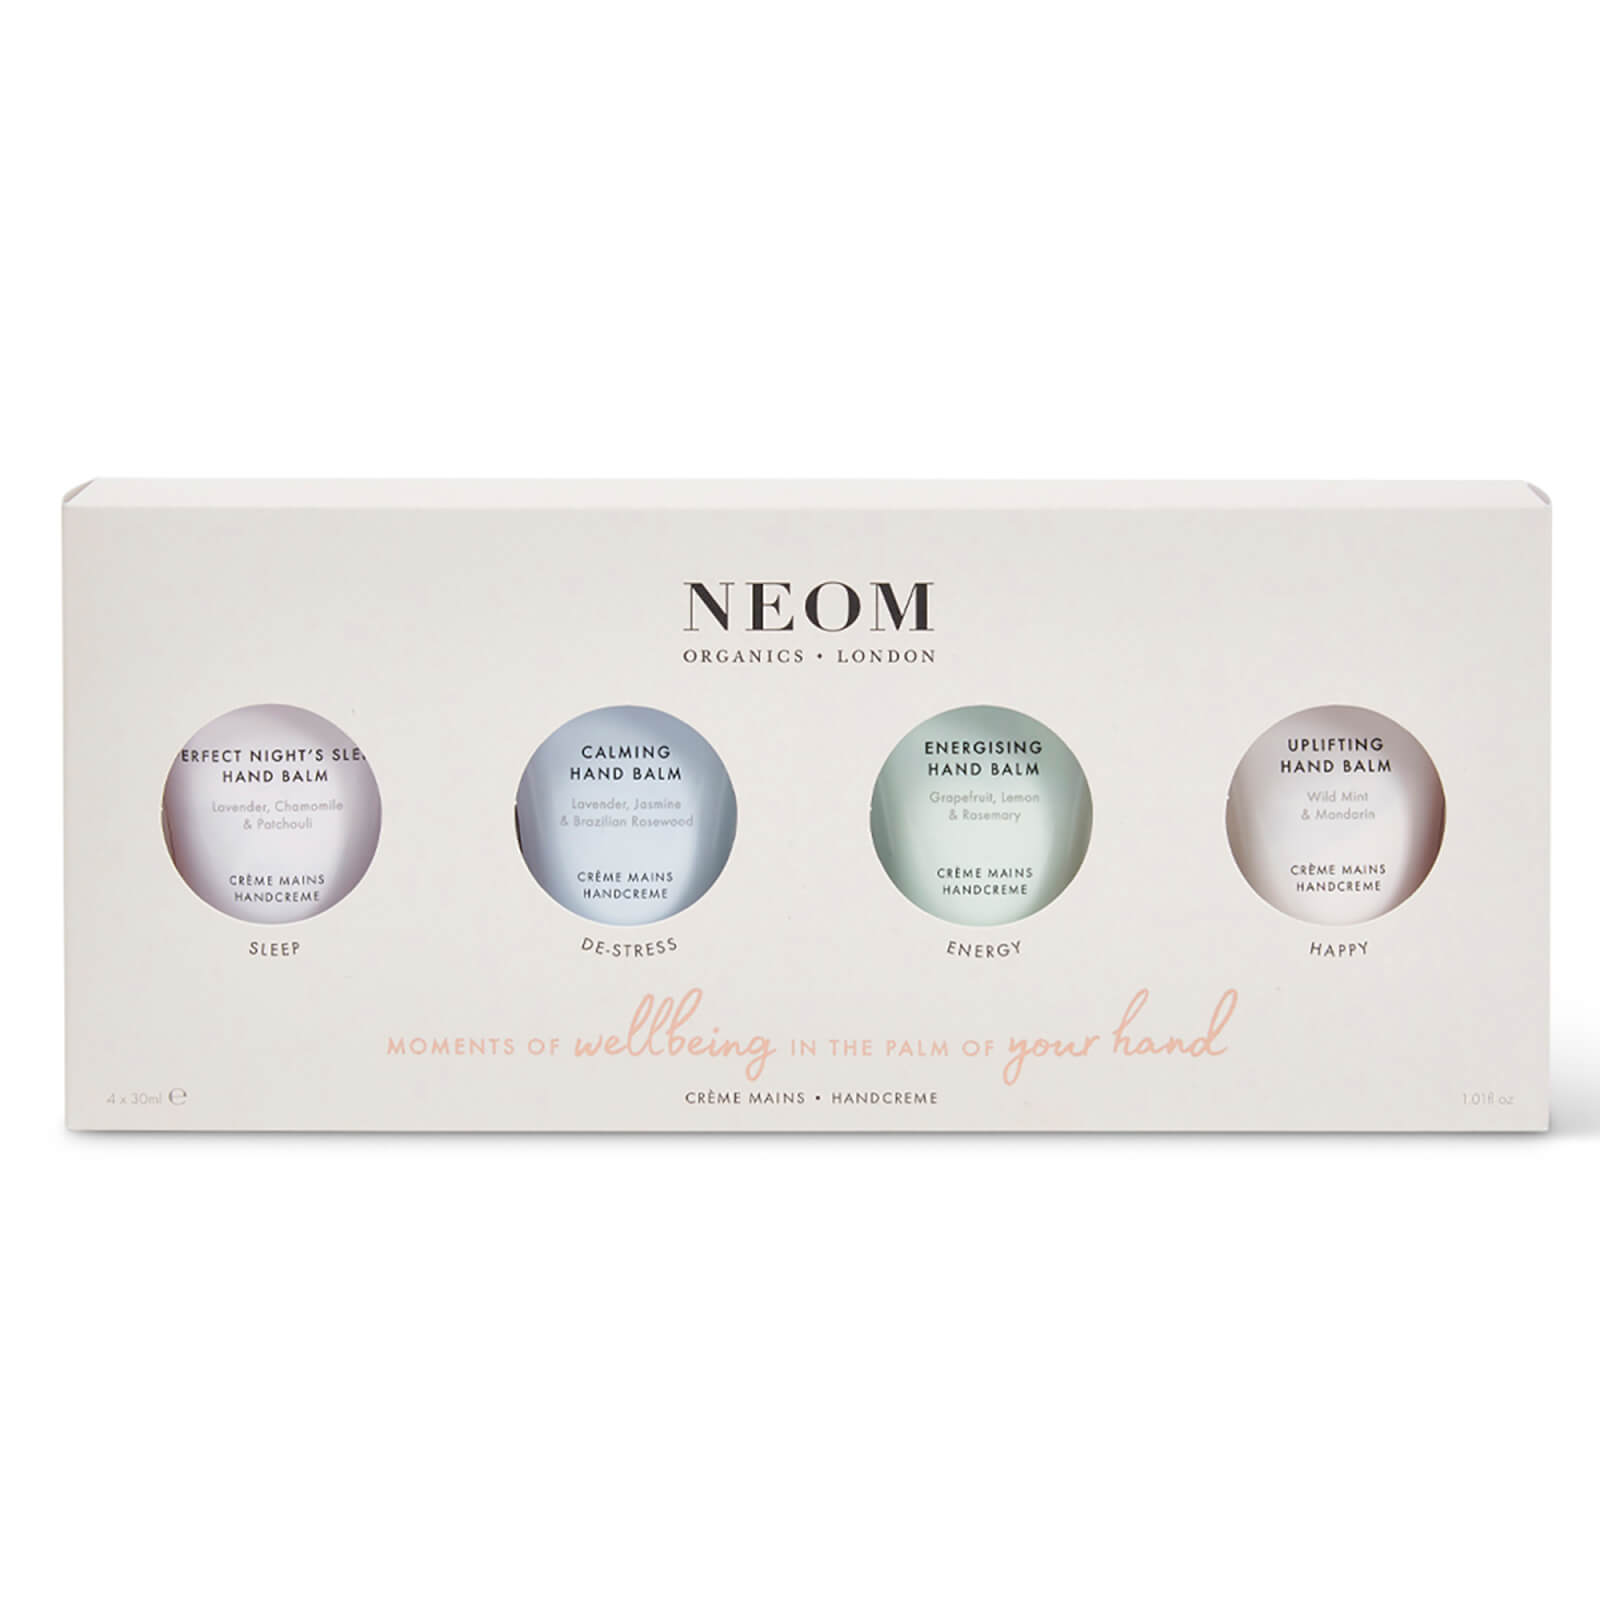 NEOM NEOM MOMENTS OF WELLBEING IN THE PALM OF YOUR HAND 120ML (WORTH $40.00),14385